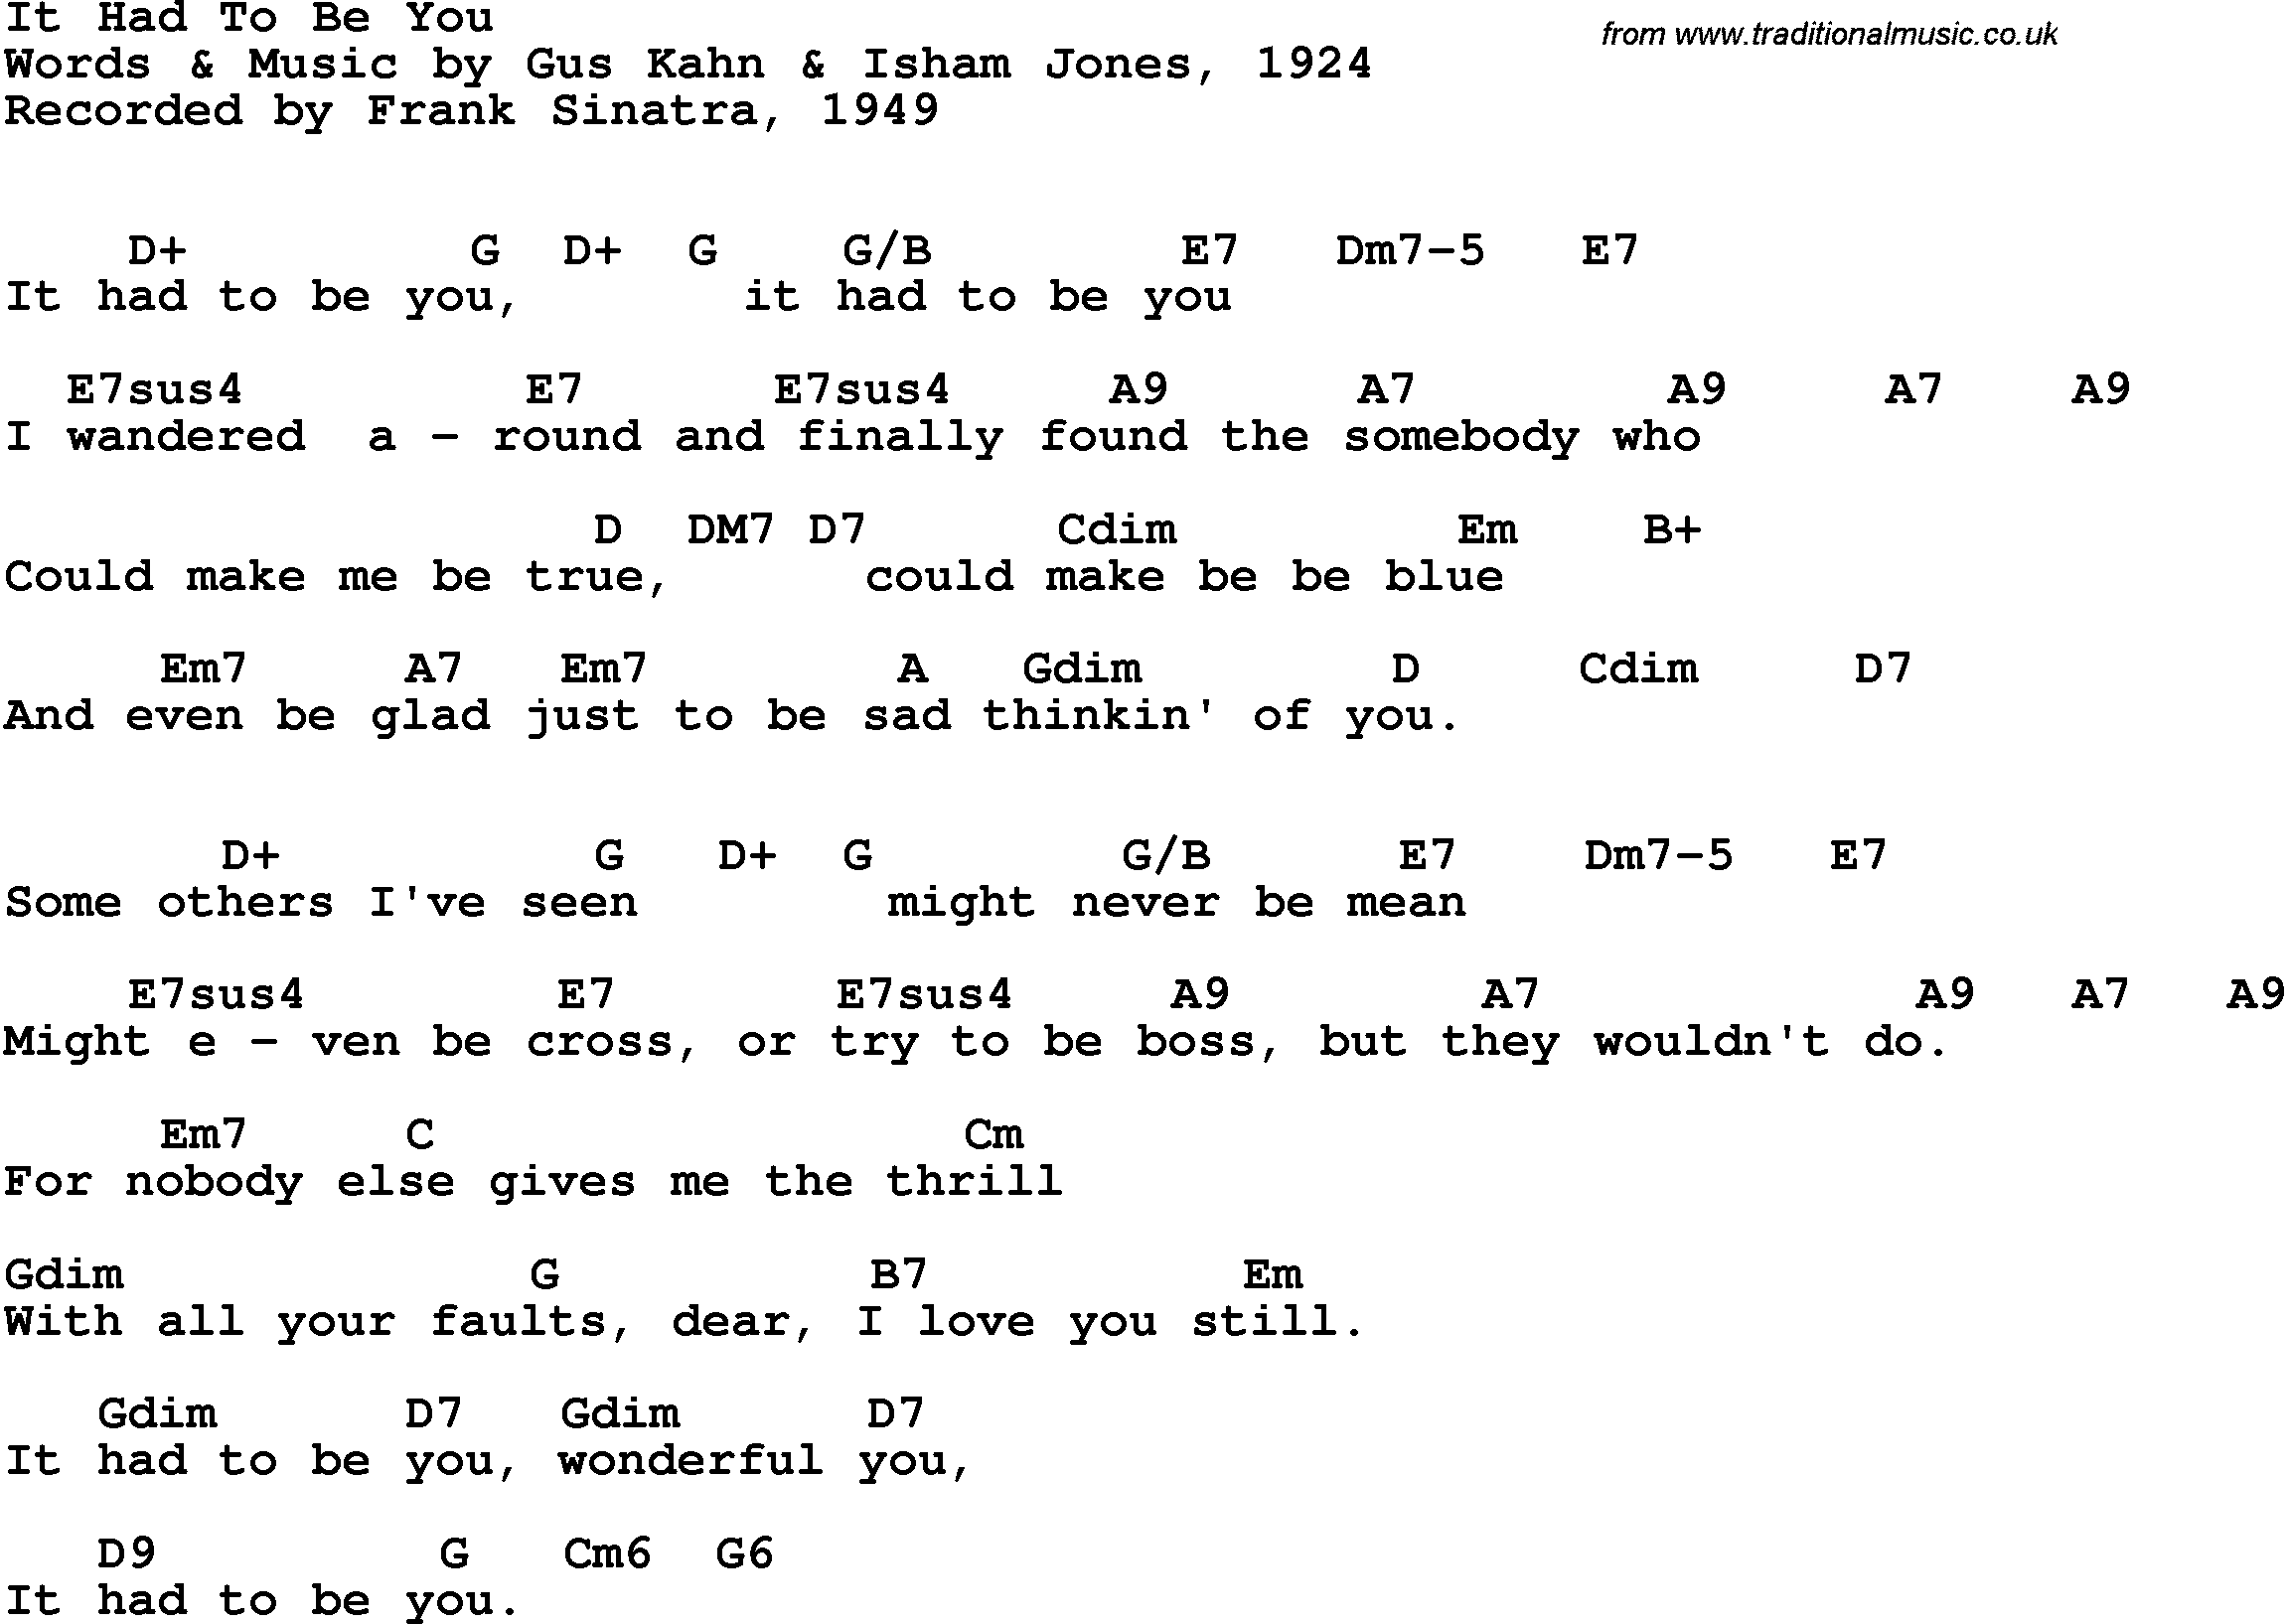 Song Lyrics with guitar chords for It Had To Be You - Frank Sinatra, 1949